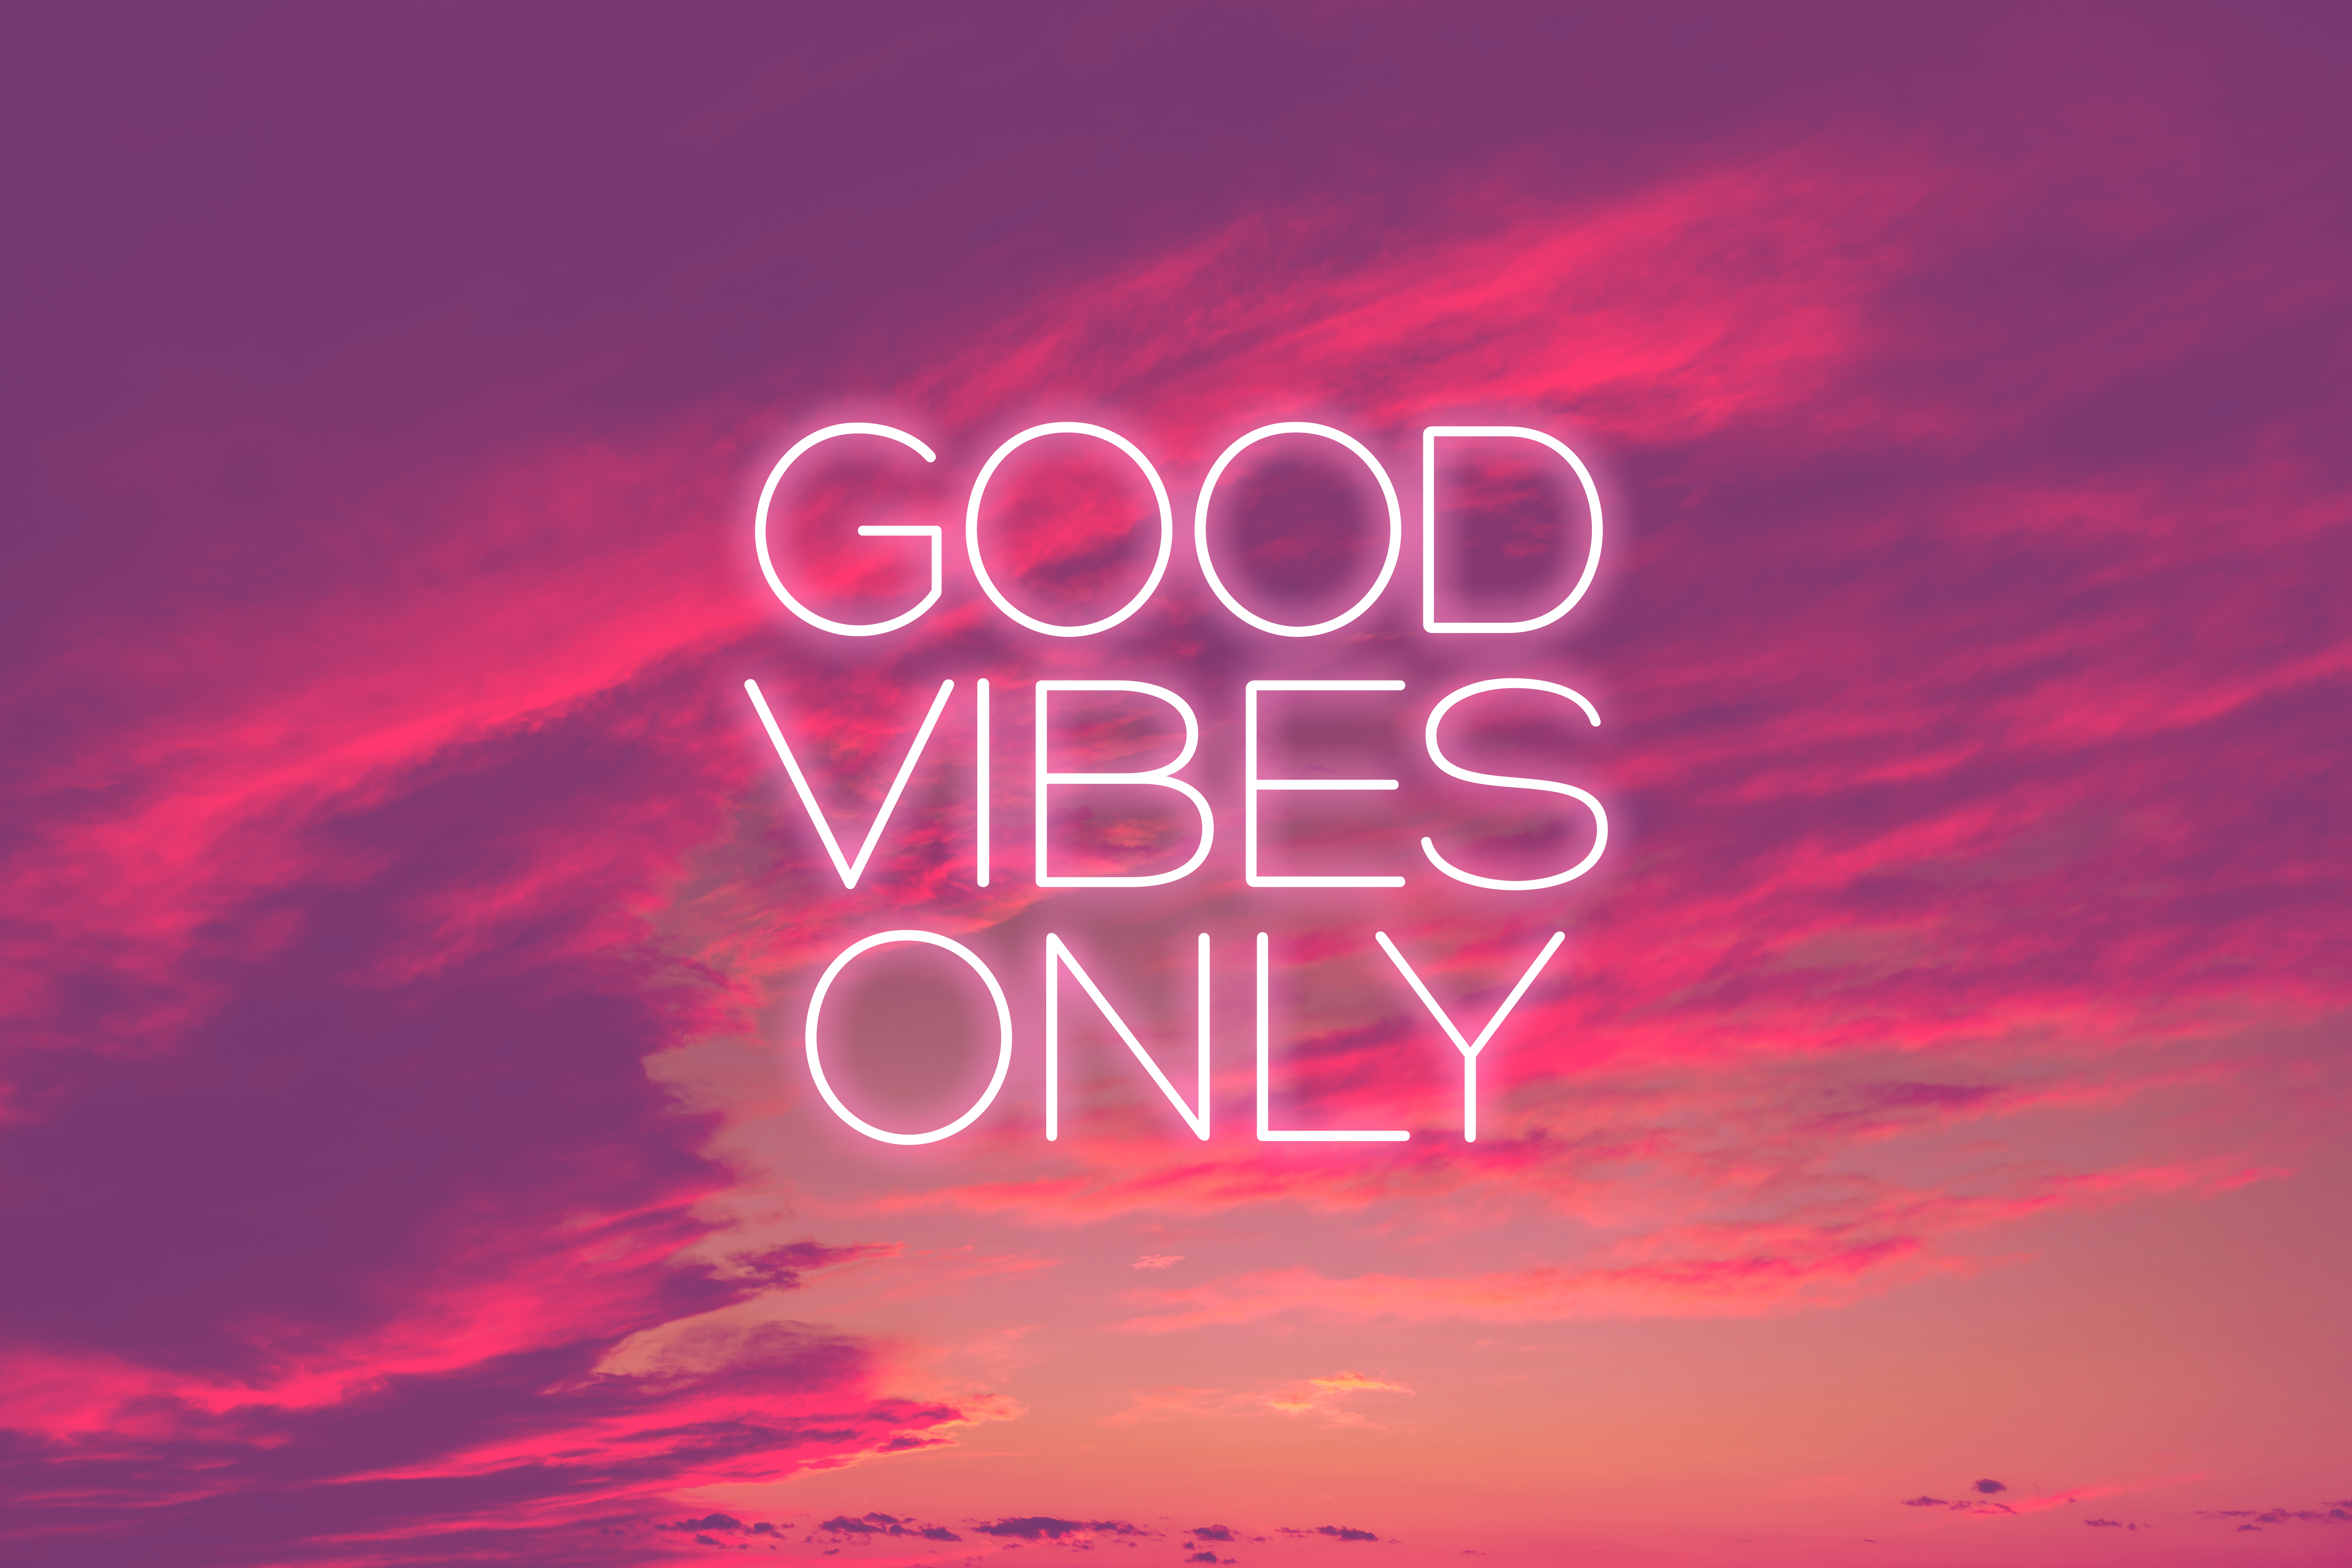 1 Good Vibes Free Photos and Images | picjumbo